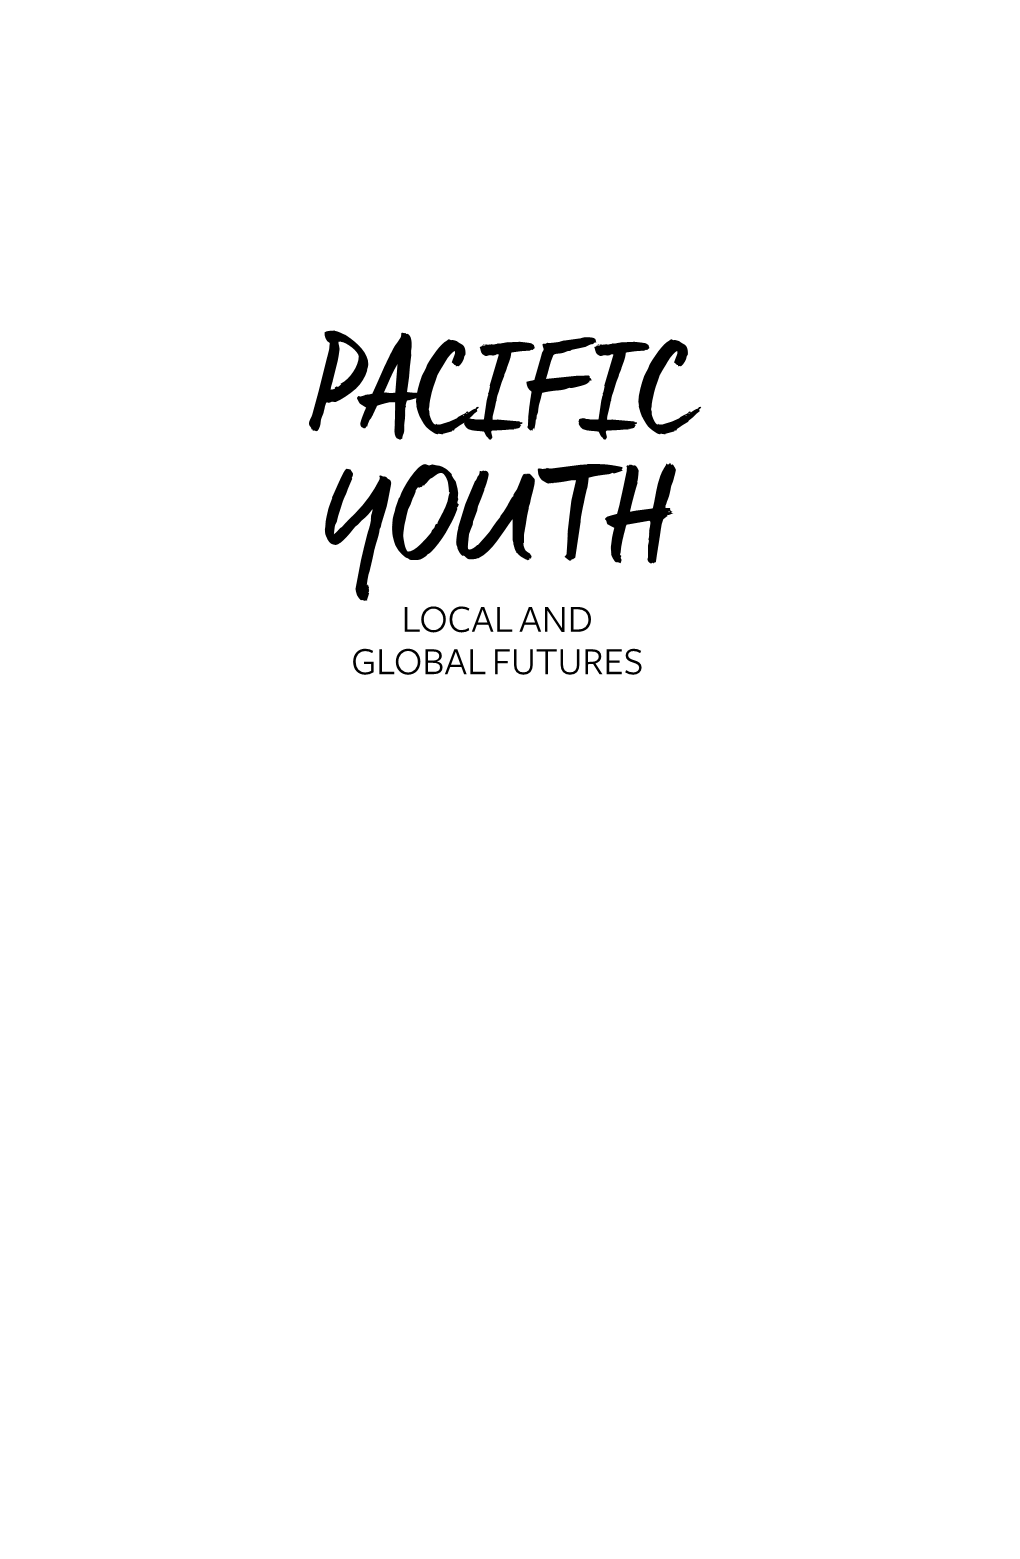 Pacific Youth: Local and Global Futures